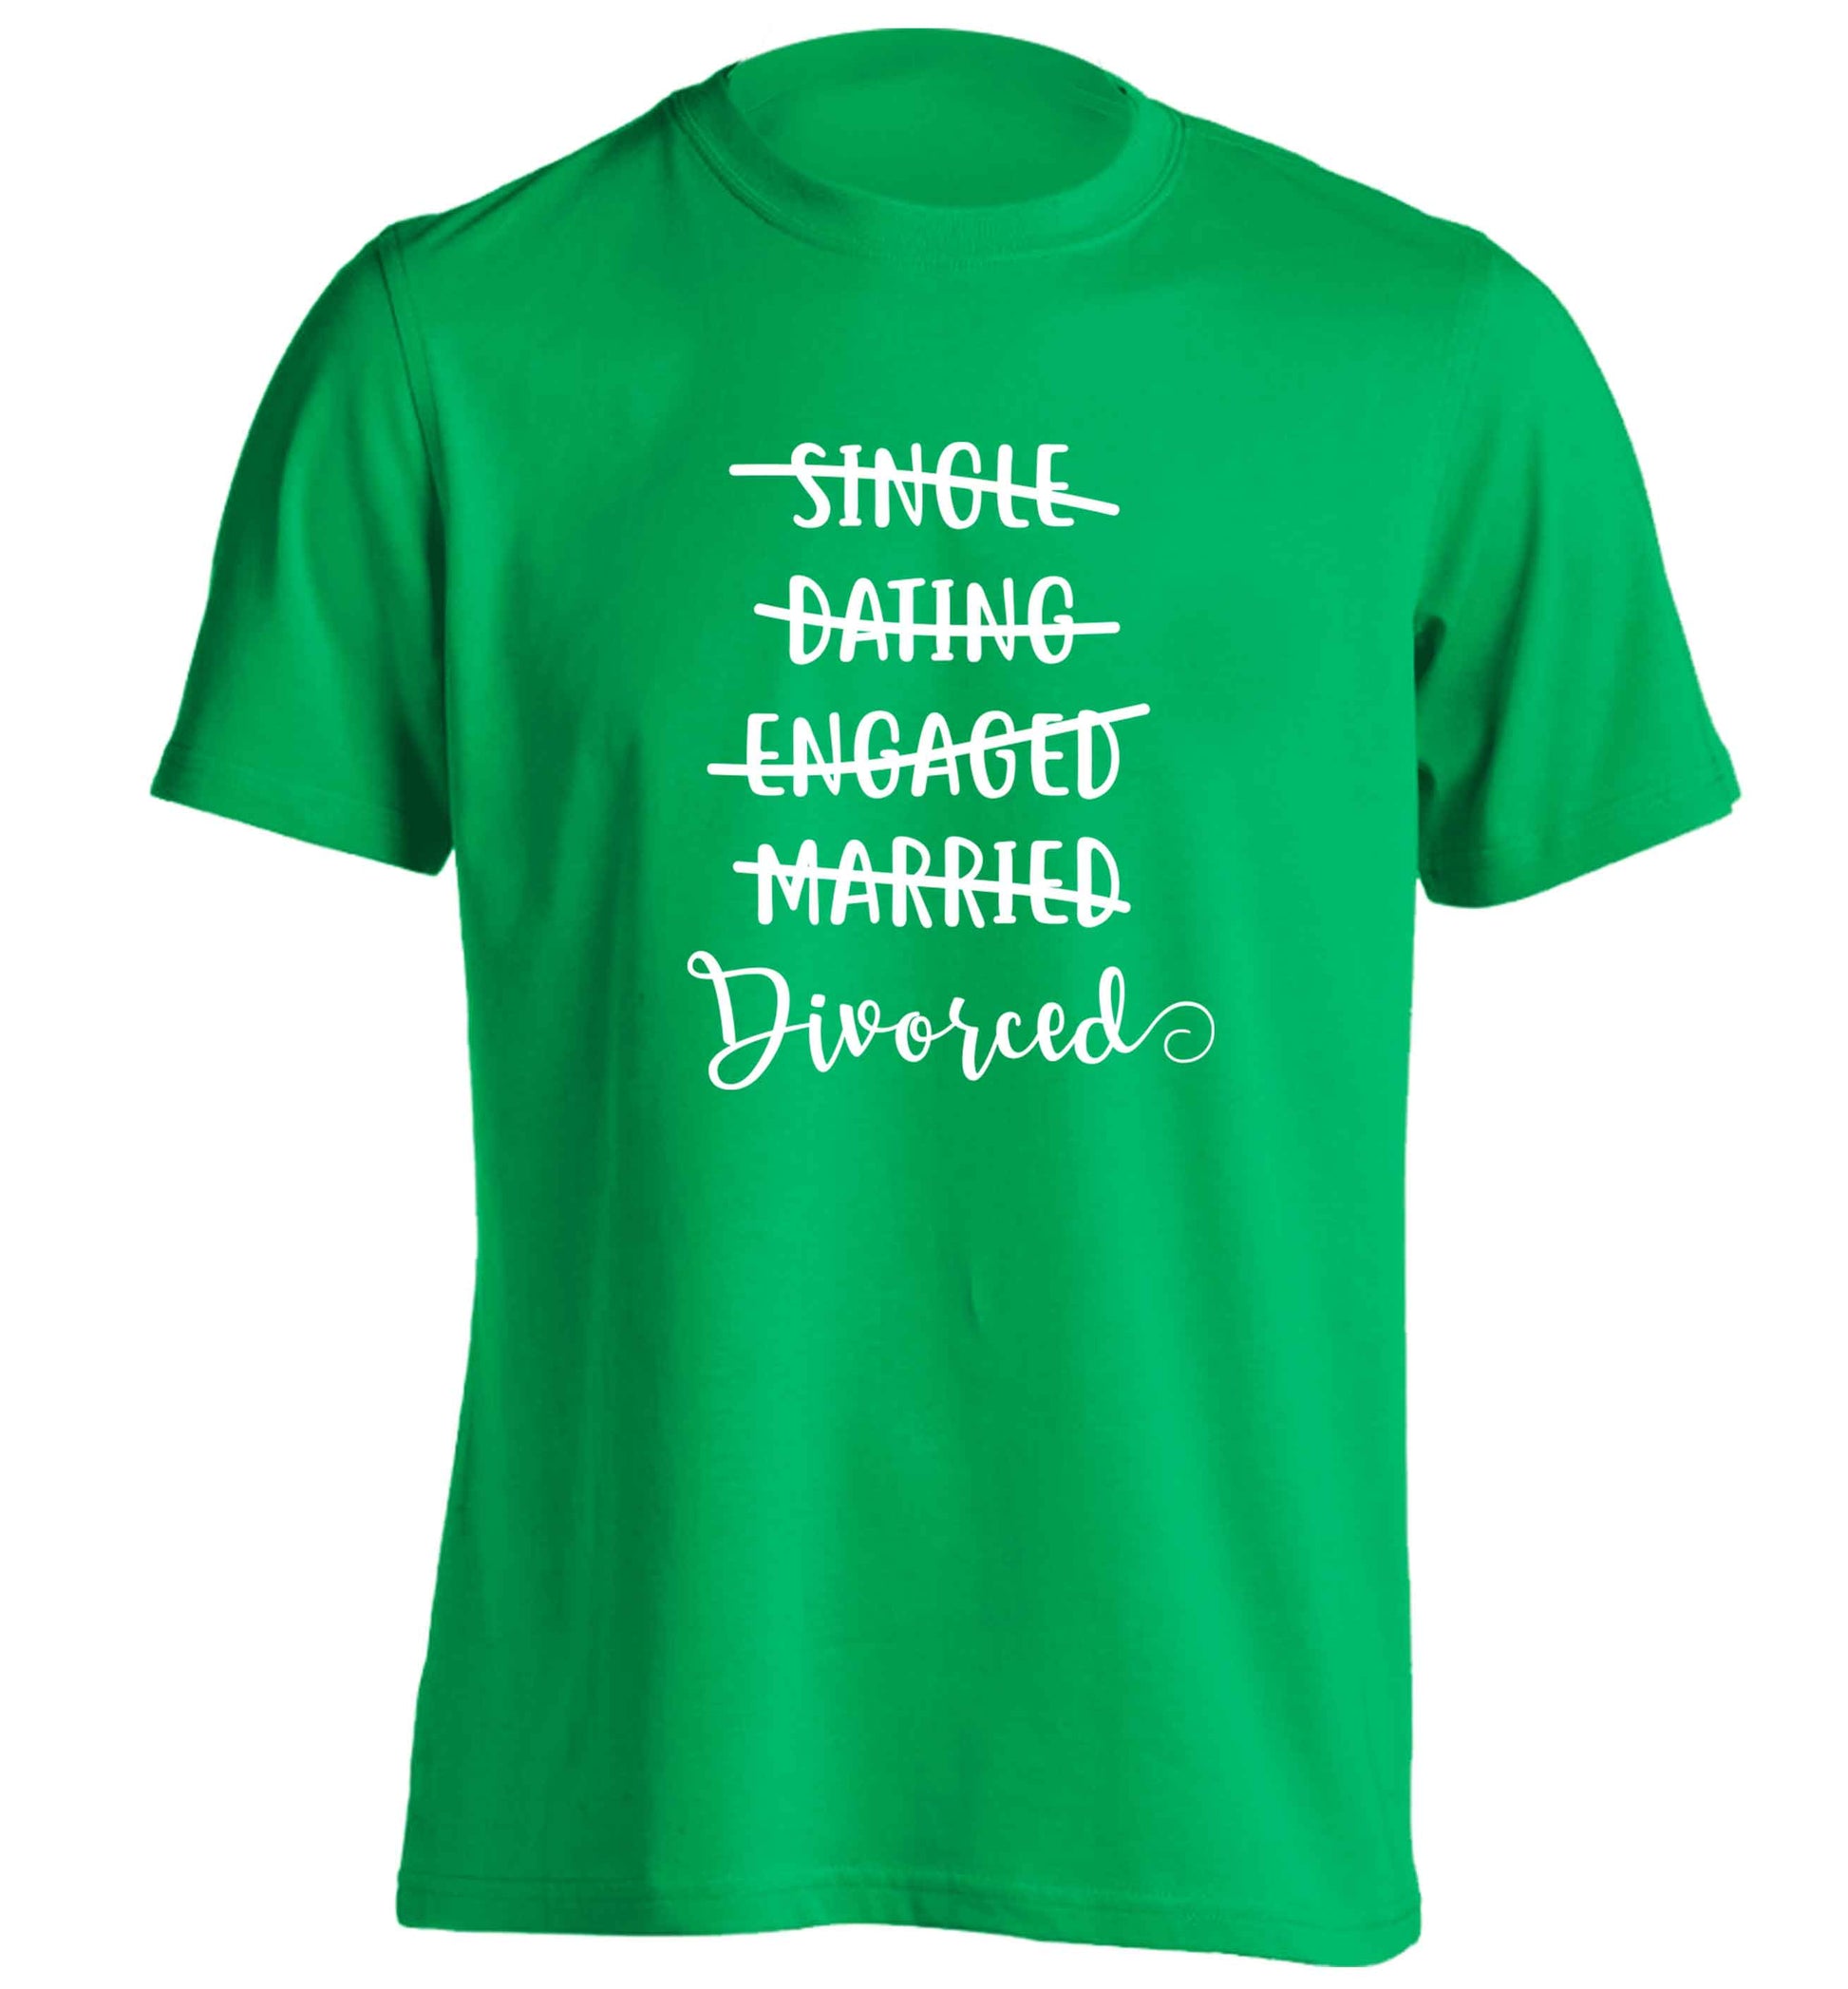 Single, dating, engaged, divorced adults unisex green Tshirt 2XL